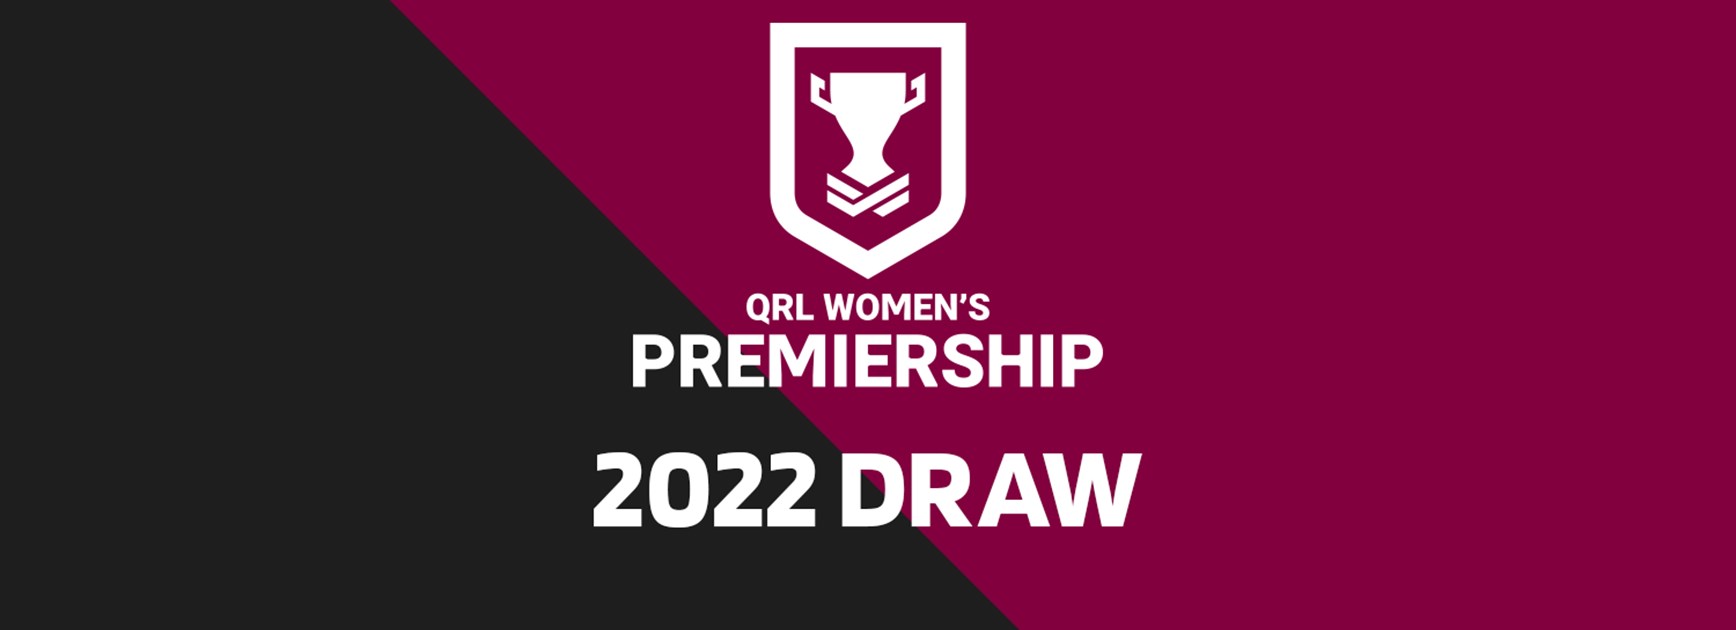 QRLW Premiership draw released